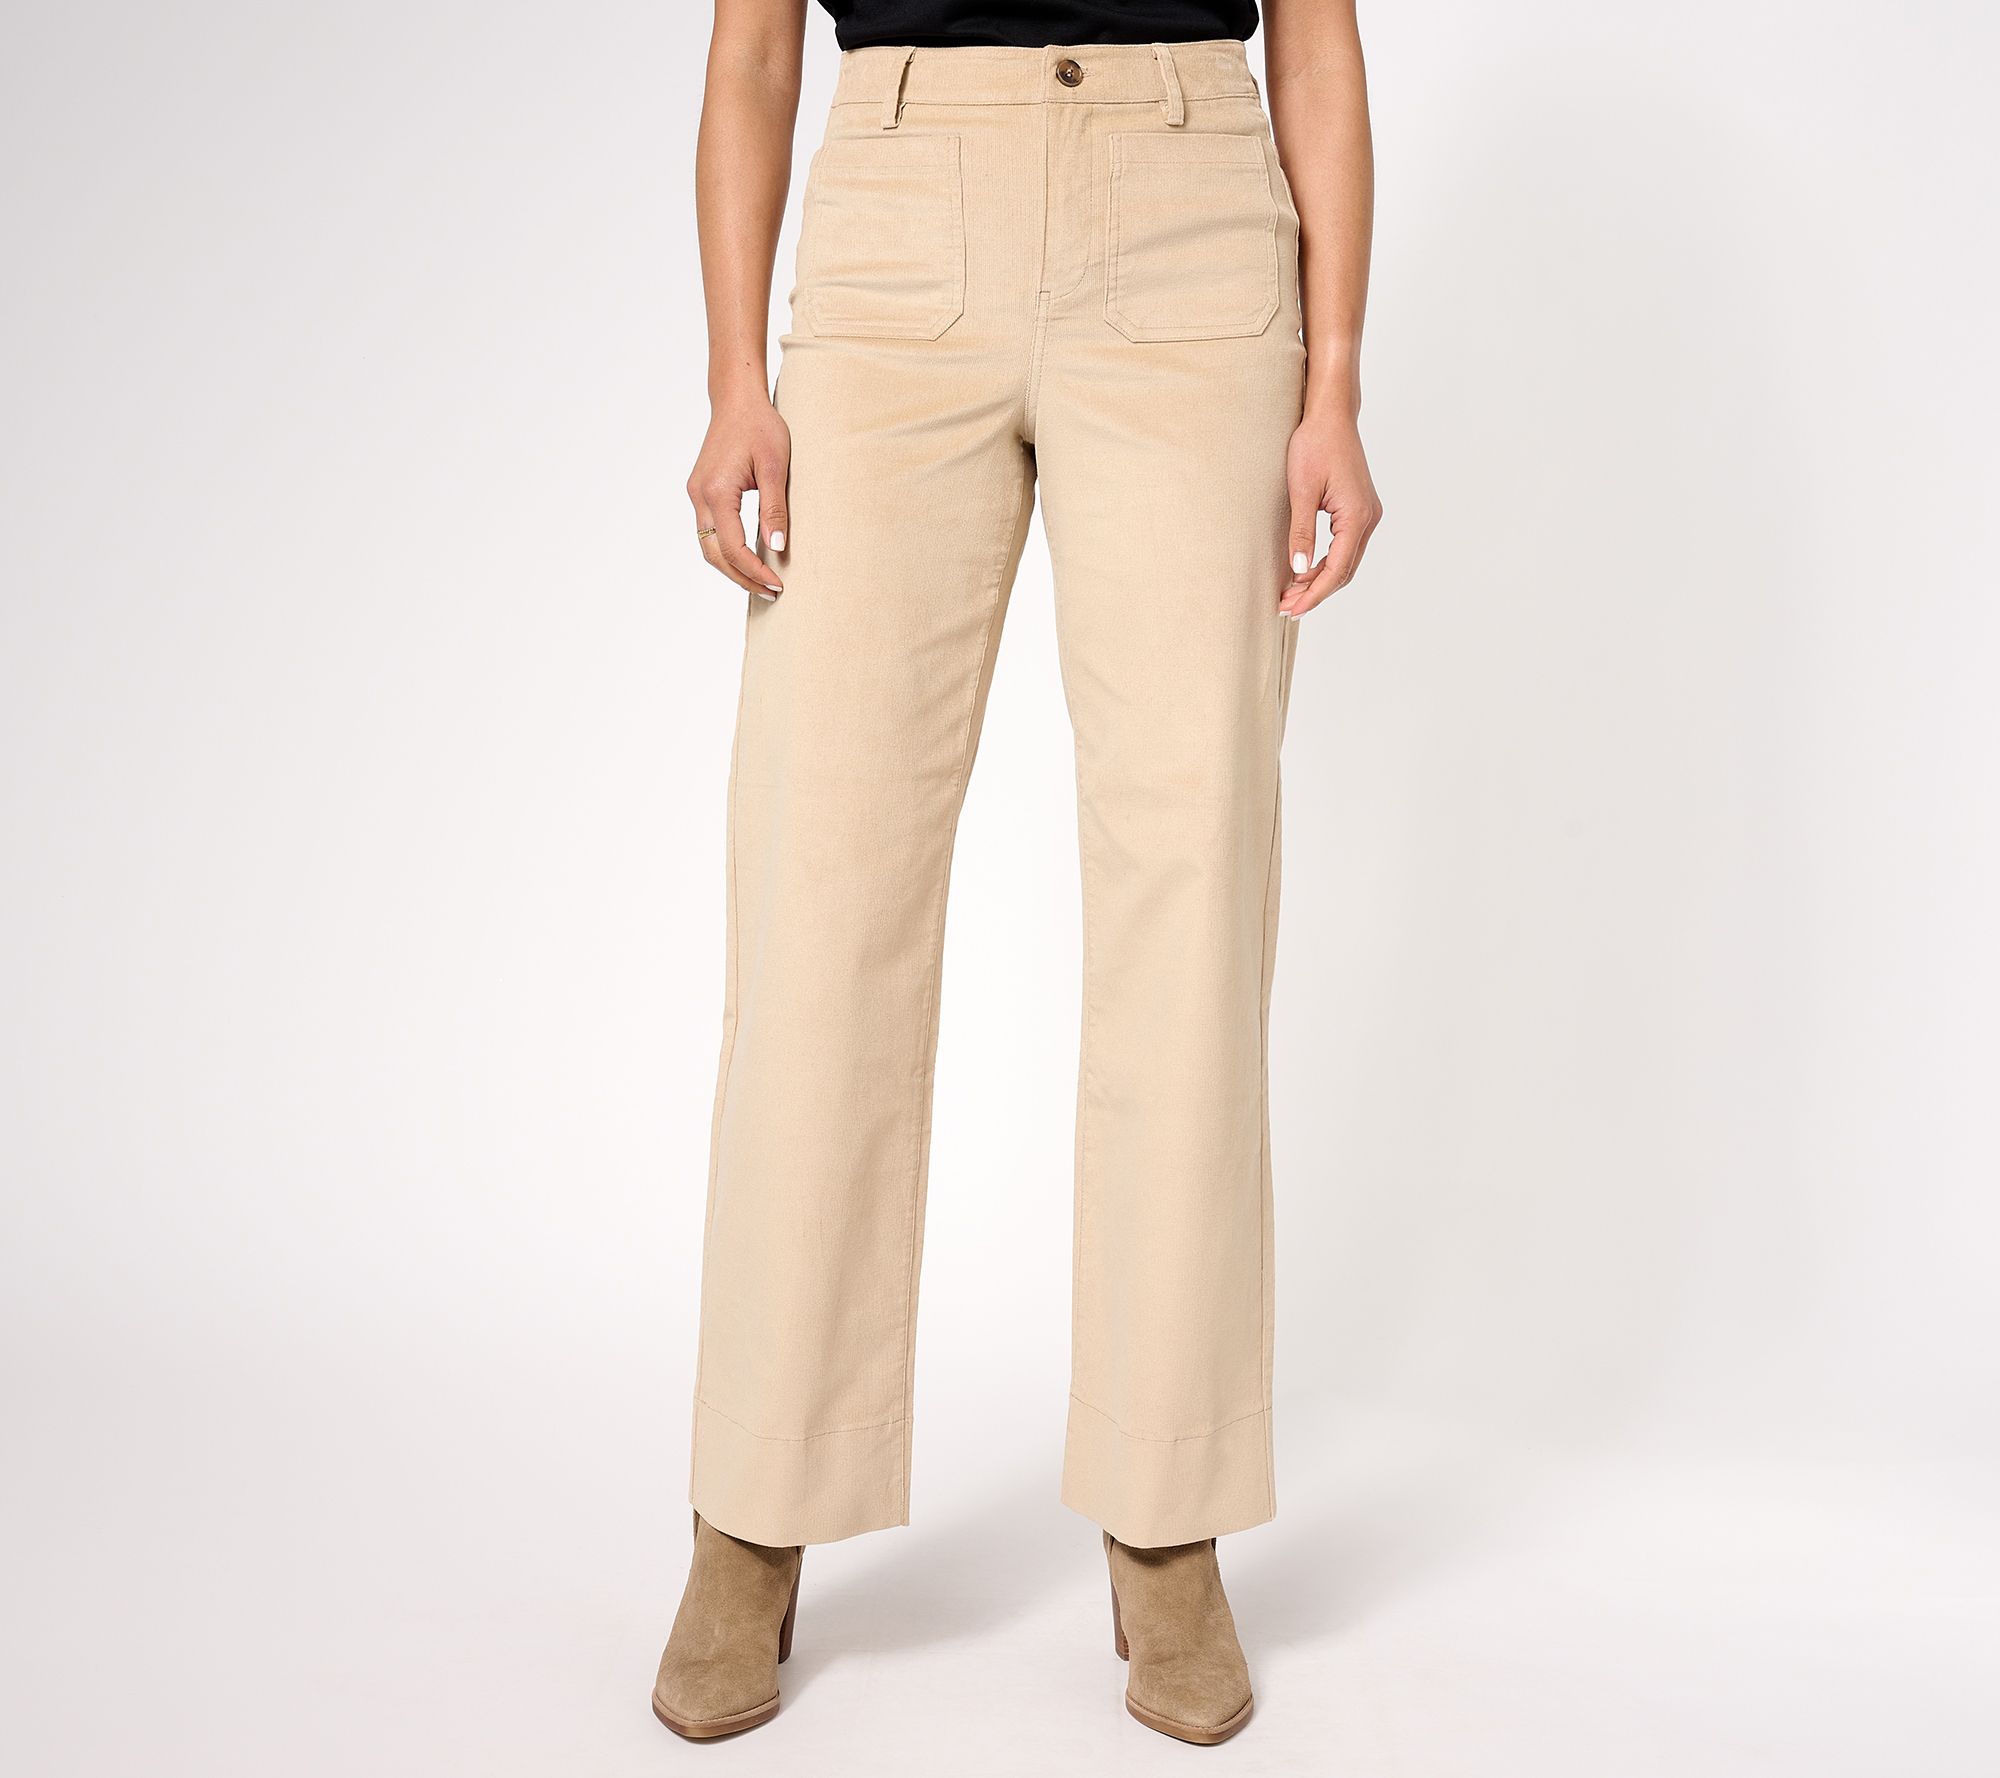 Denim & Co. Comfy Knit Air Denim Tapered Leg Pant with Pockets on QVC 